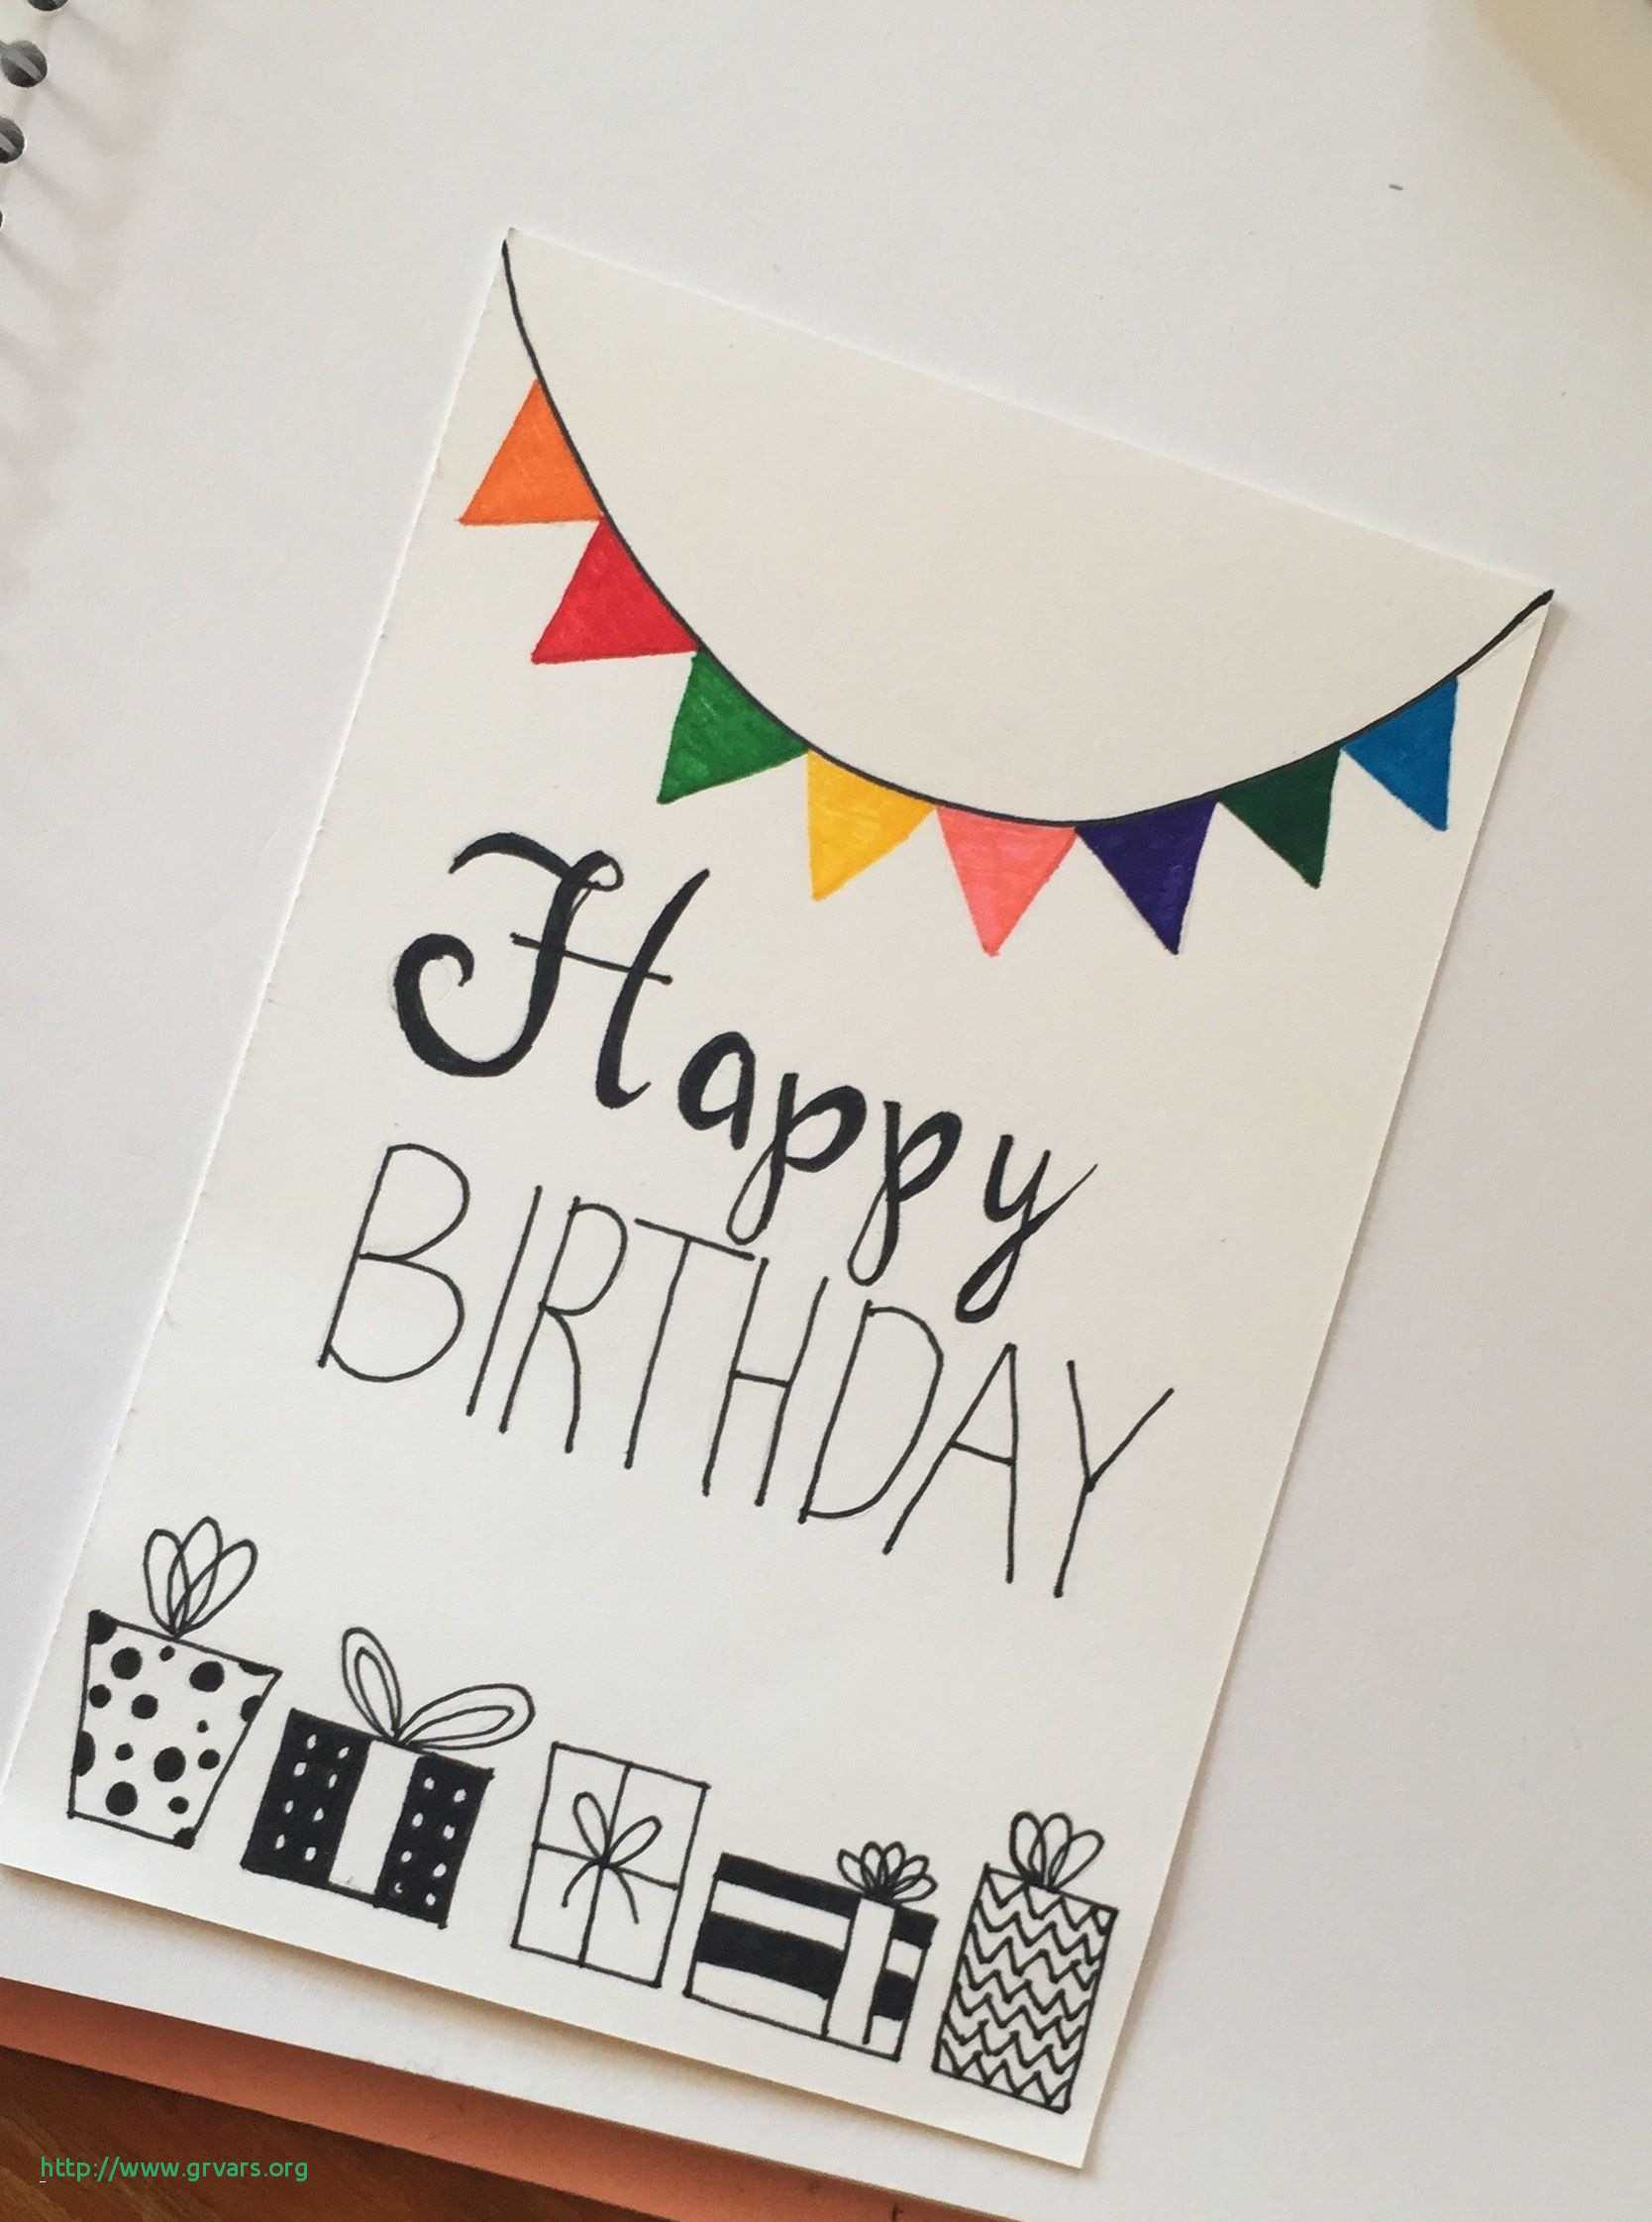 Ideas To Write In A Birthday Card Birthday Card Ideas For Best Friend Funny 18th To Write Envelopes